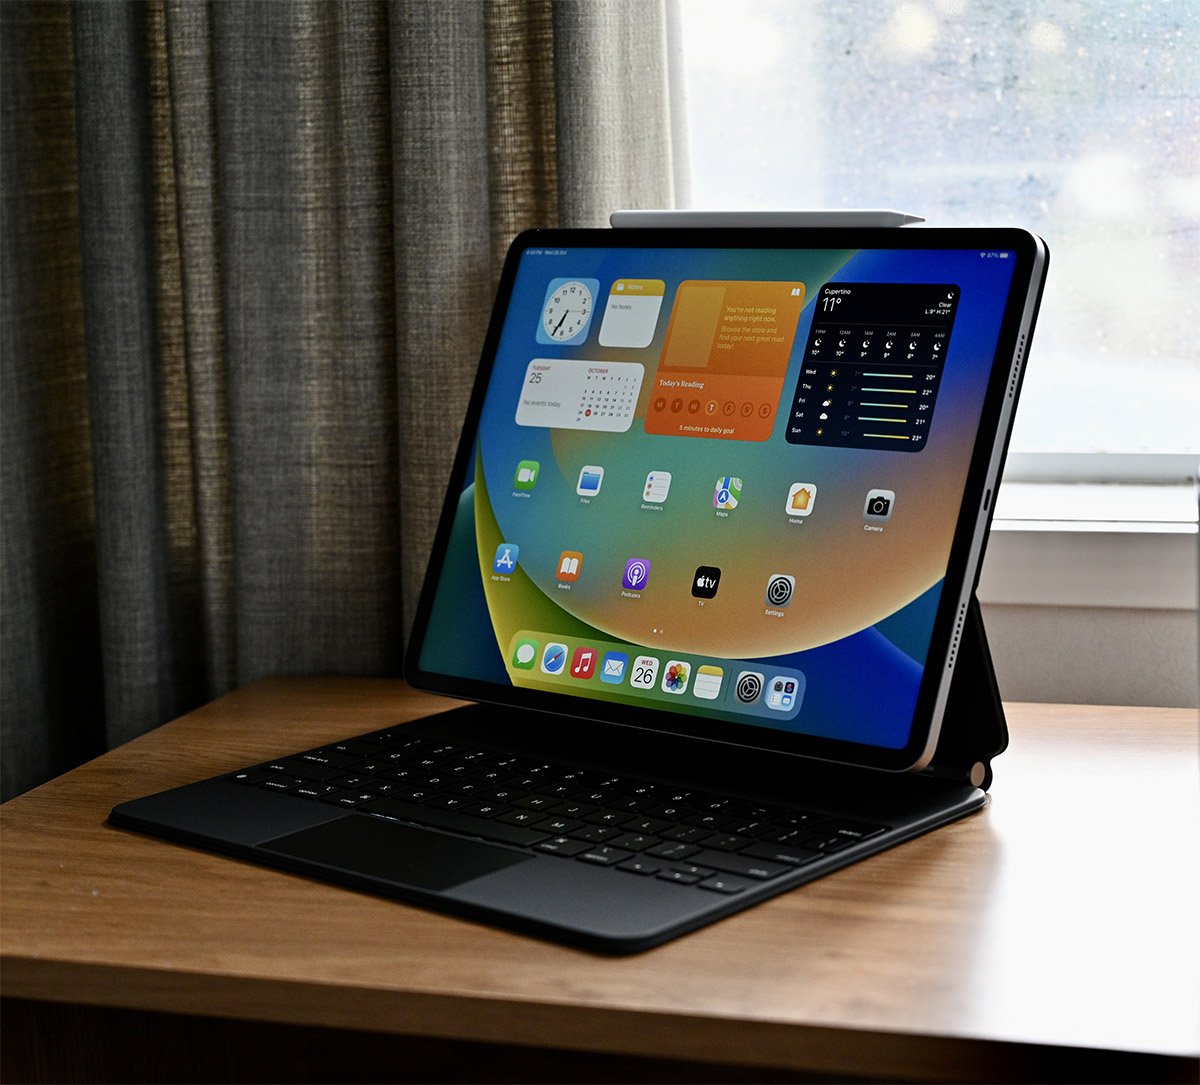 Do you have last year's iPad Pro with the M1 chip?